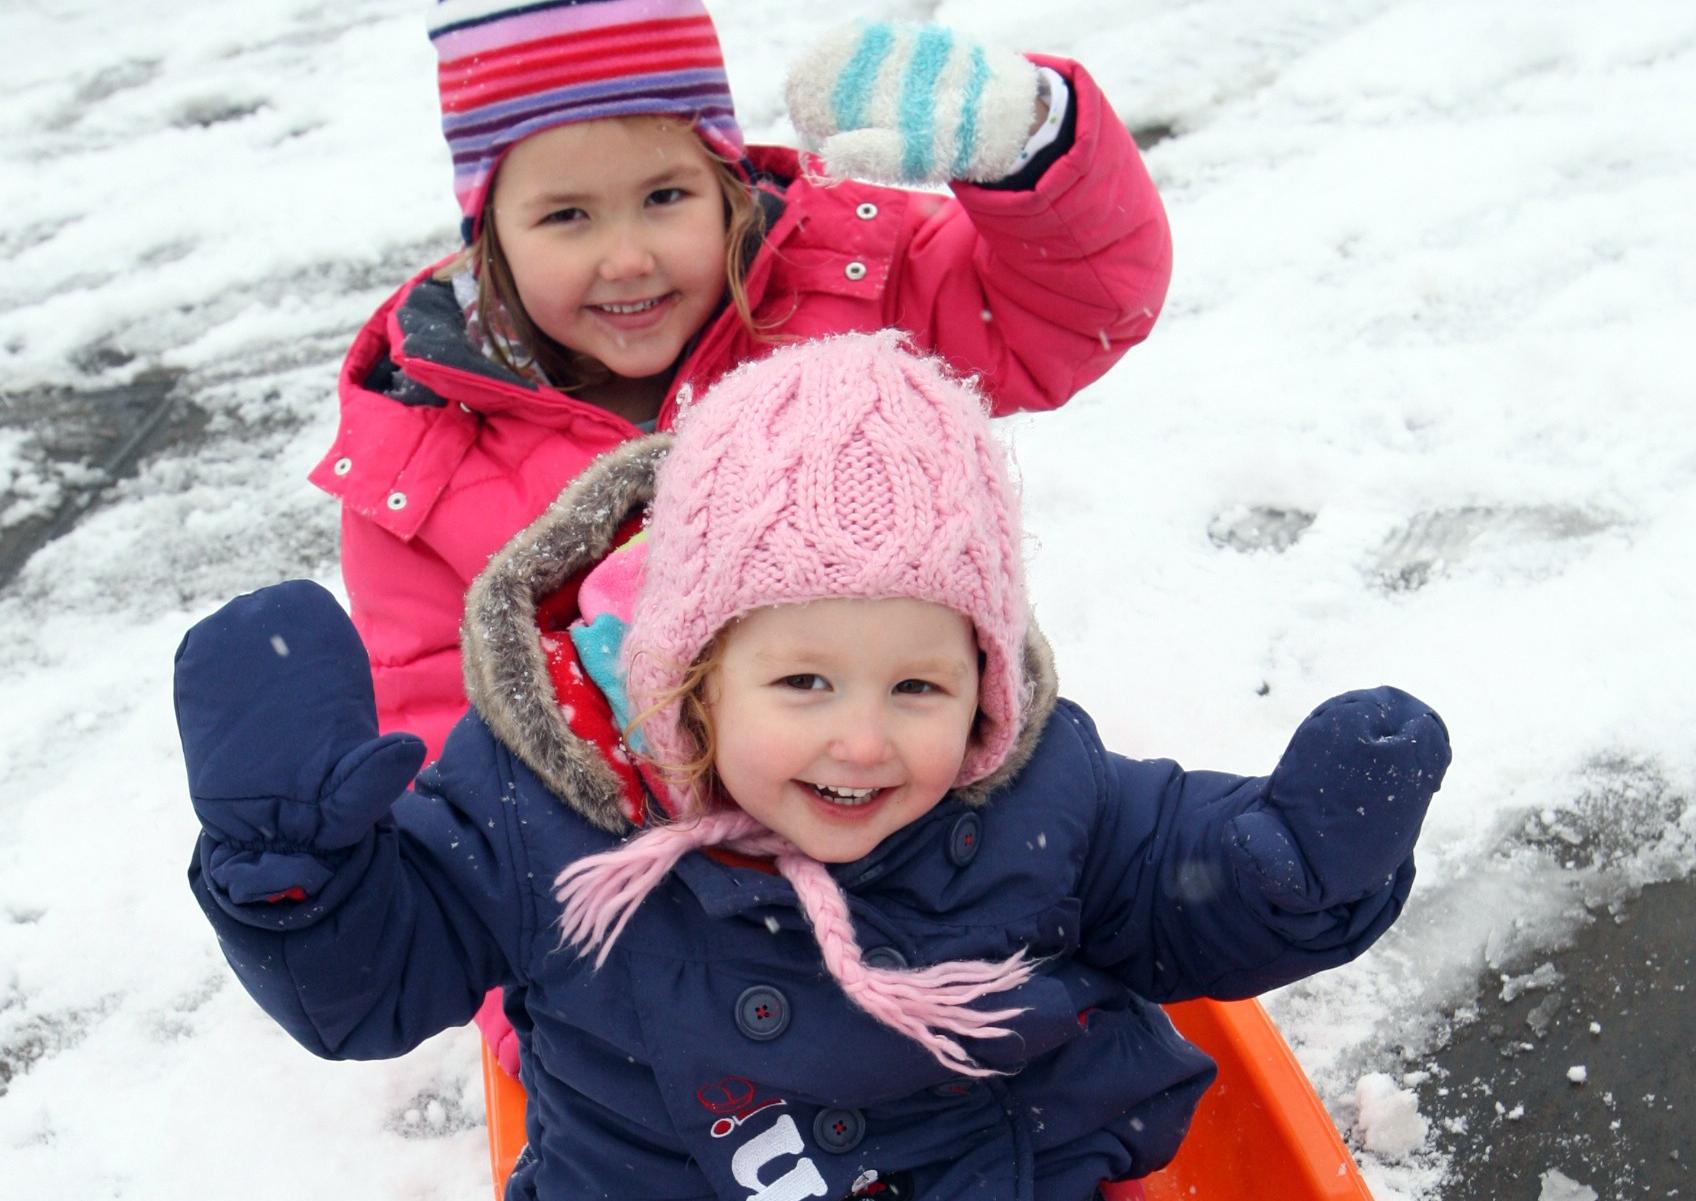 Izabella, five, and Matilda Whitmore, two, in Horsham Park. Photo by Steve Cobb.